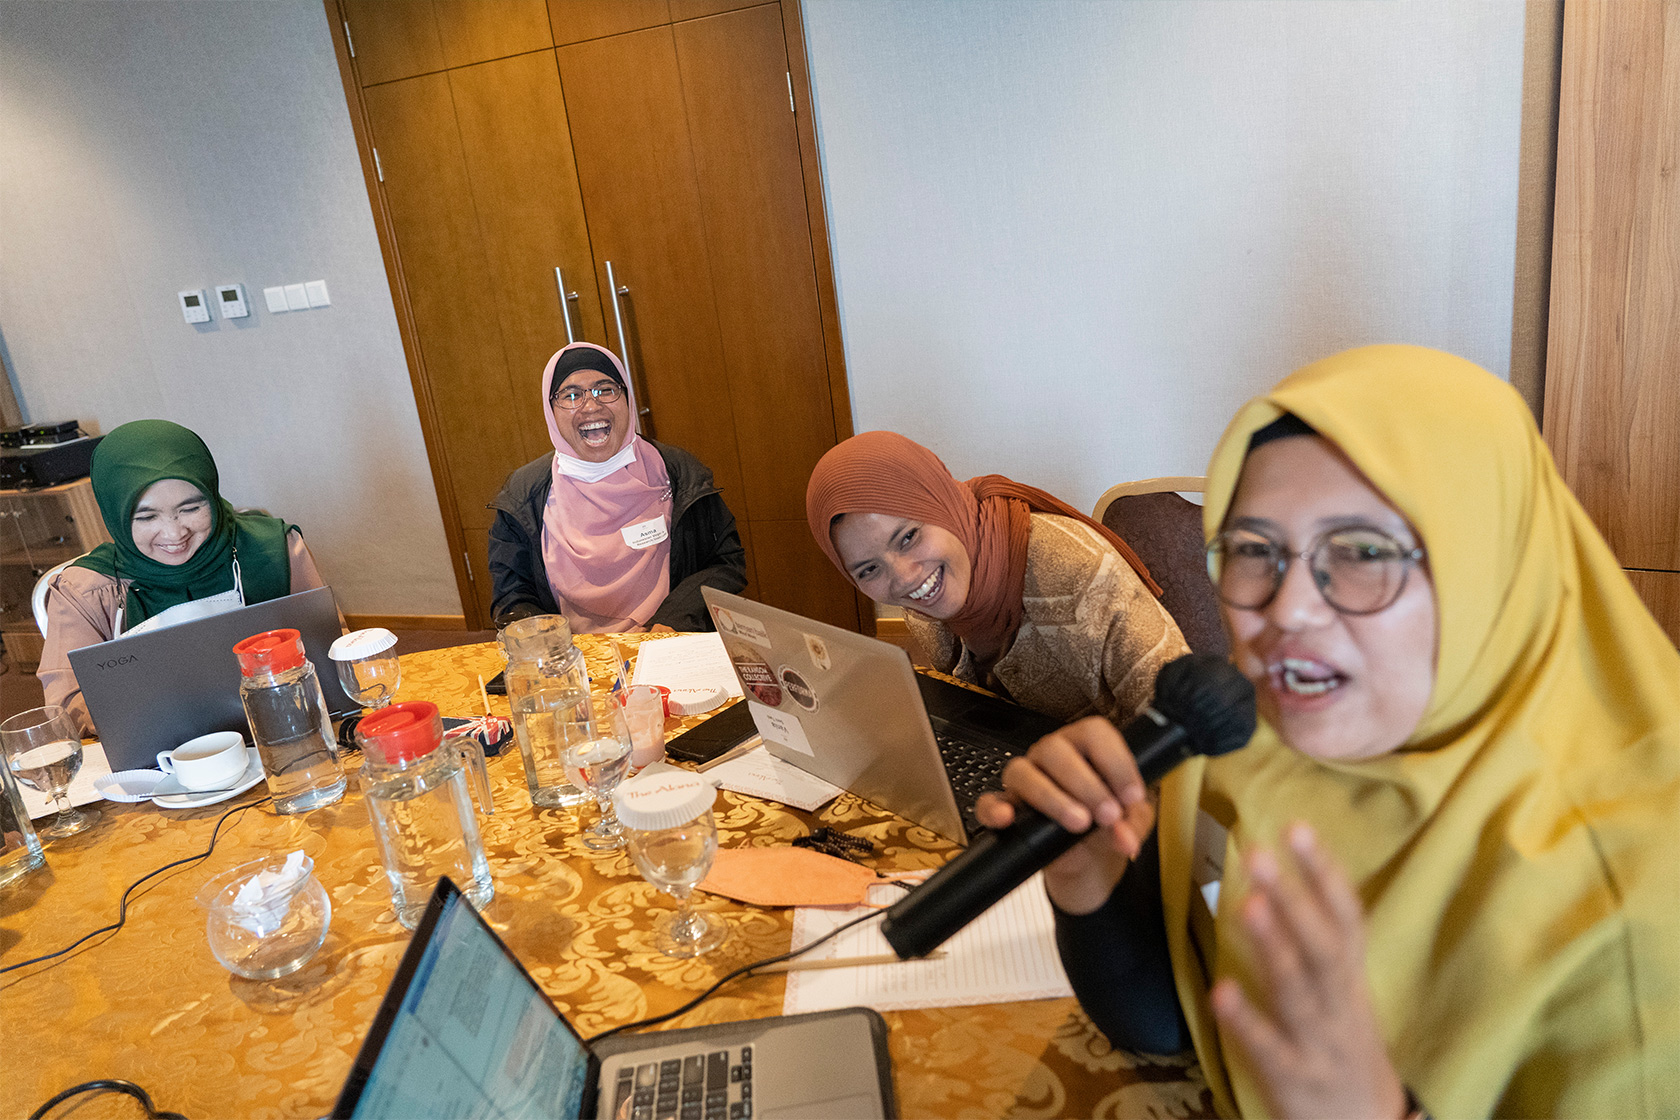 The Short Course participants shared innovative suggestions to improve the sustainability of Indonesia’s food systems.